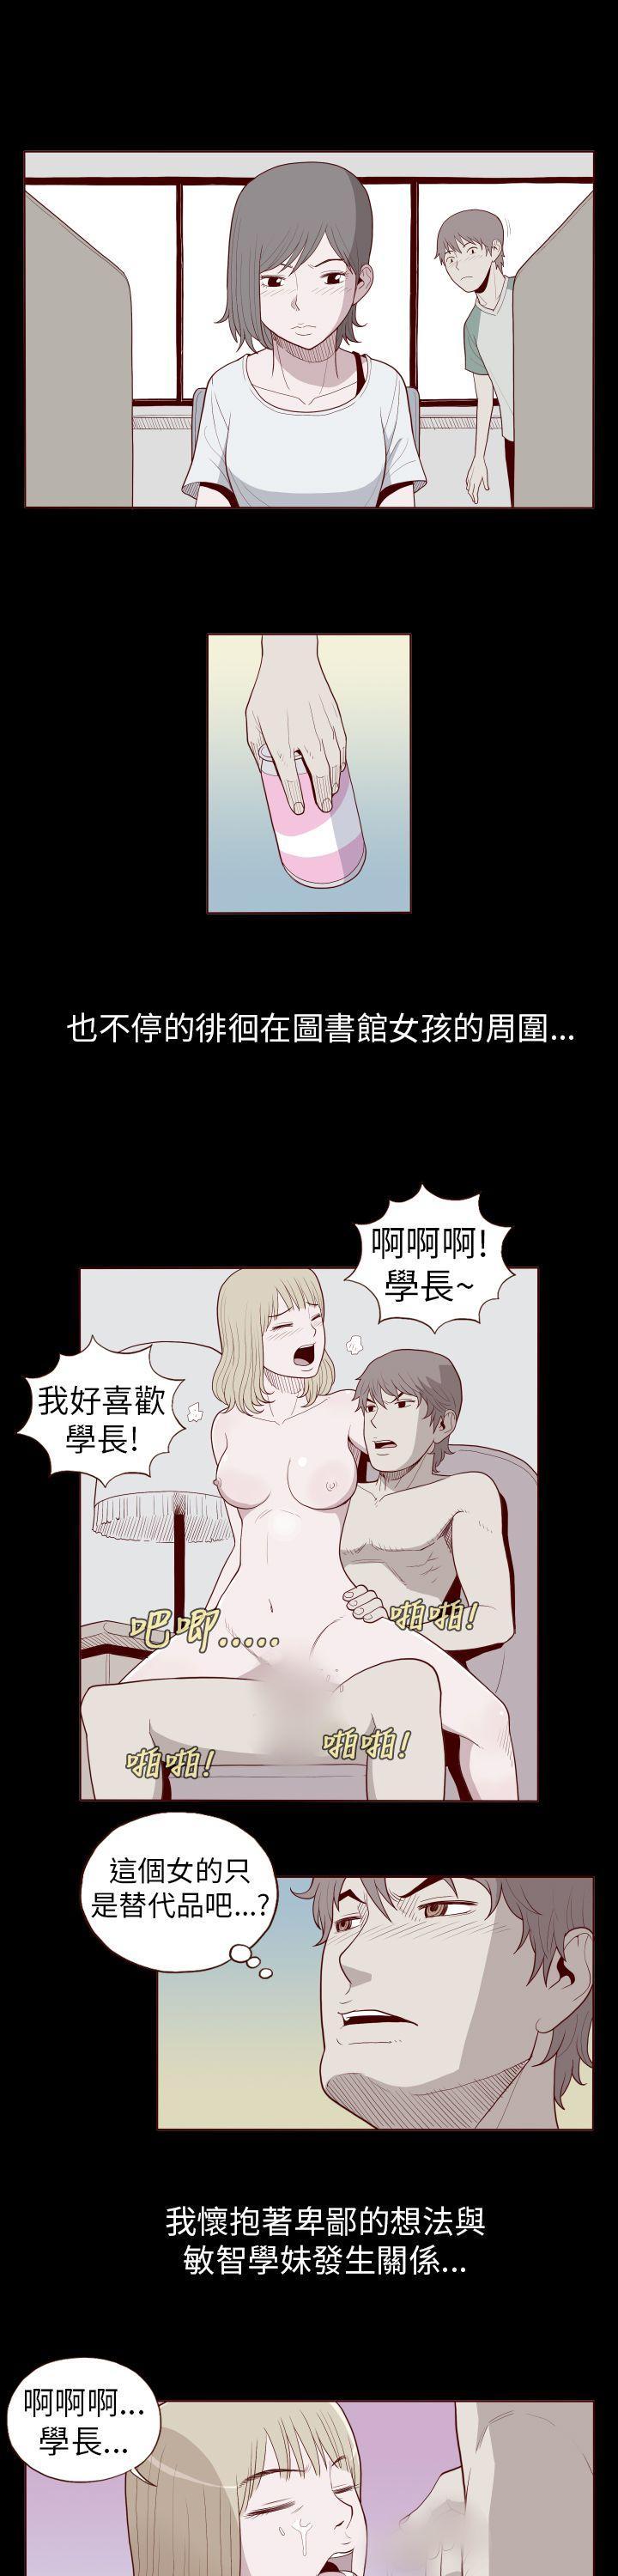 Tiny Tits Porn 淫亂魔鬼 Canadian - Page 5